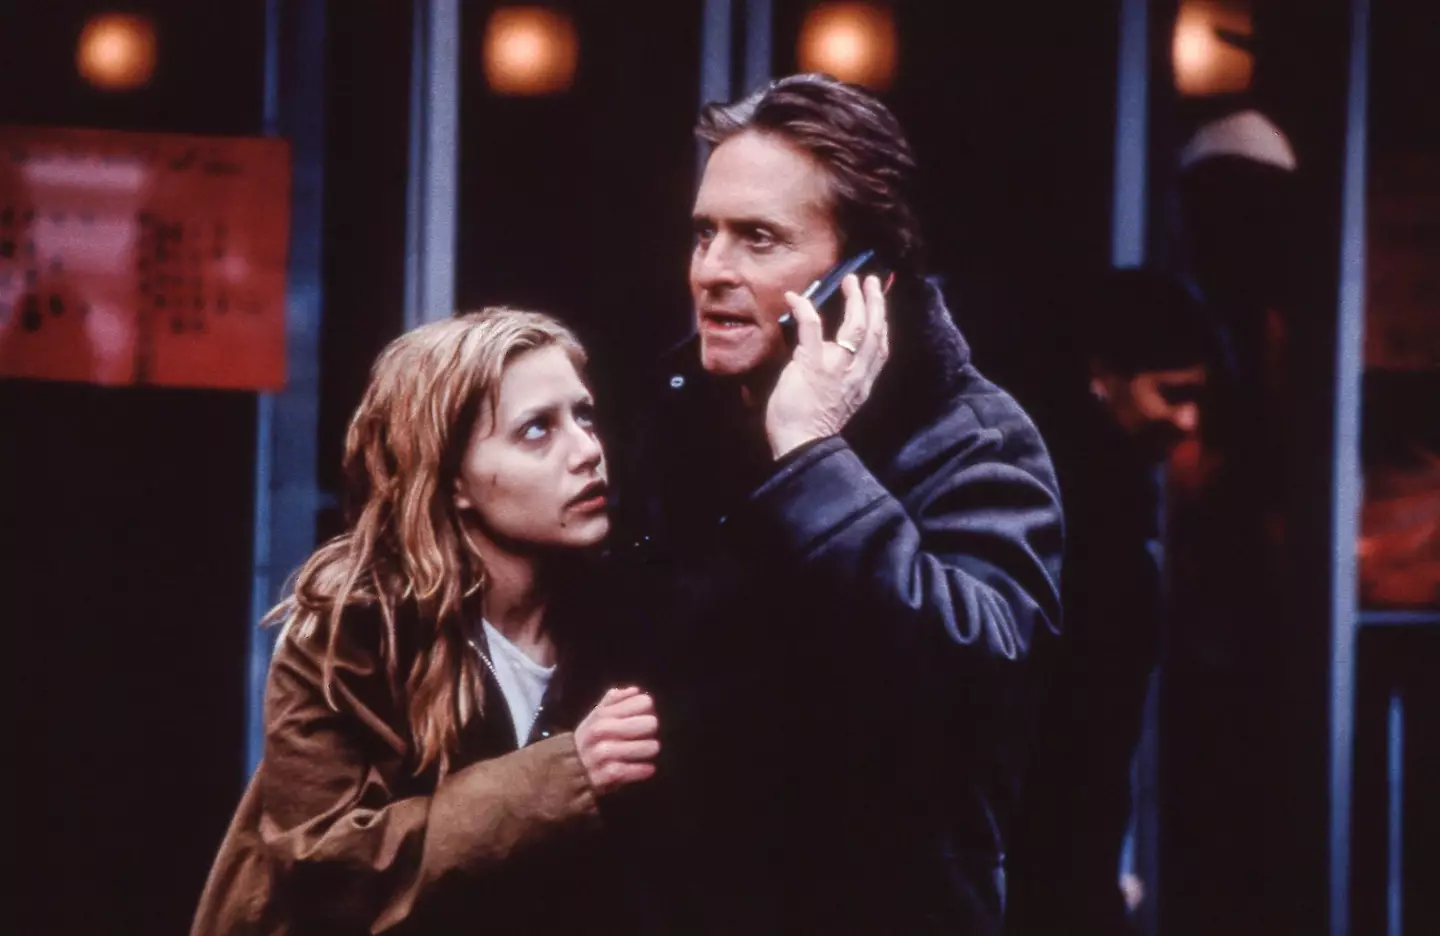 Michael Douglas and Brittany Murphy in Don't Say a Word.